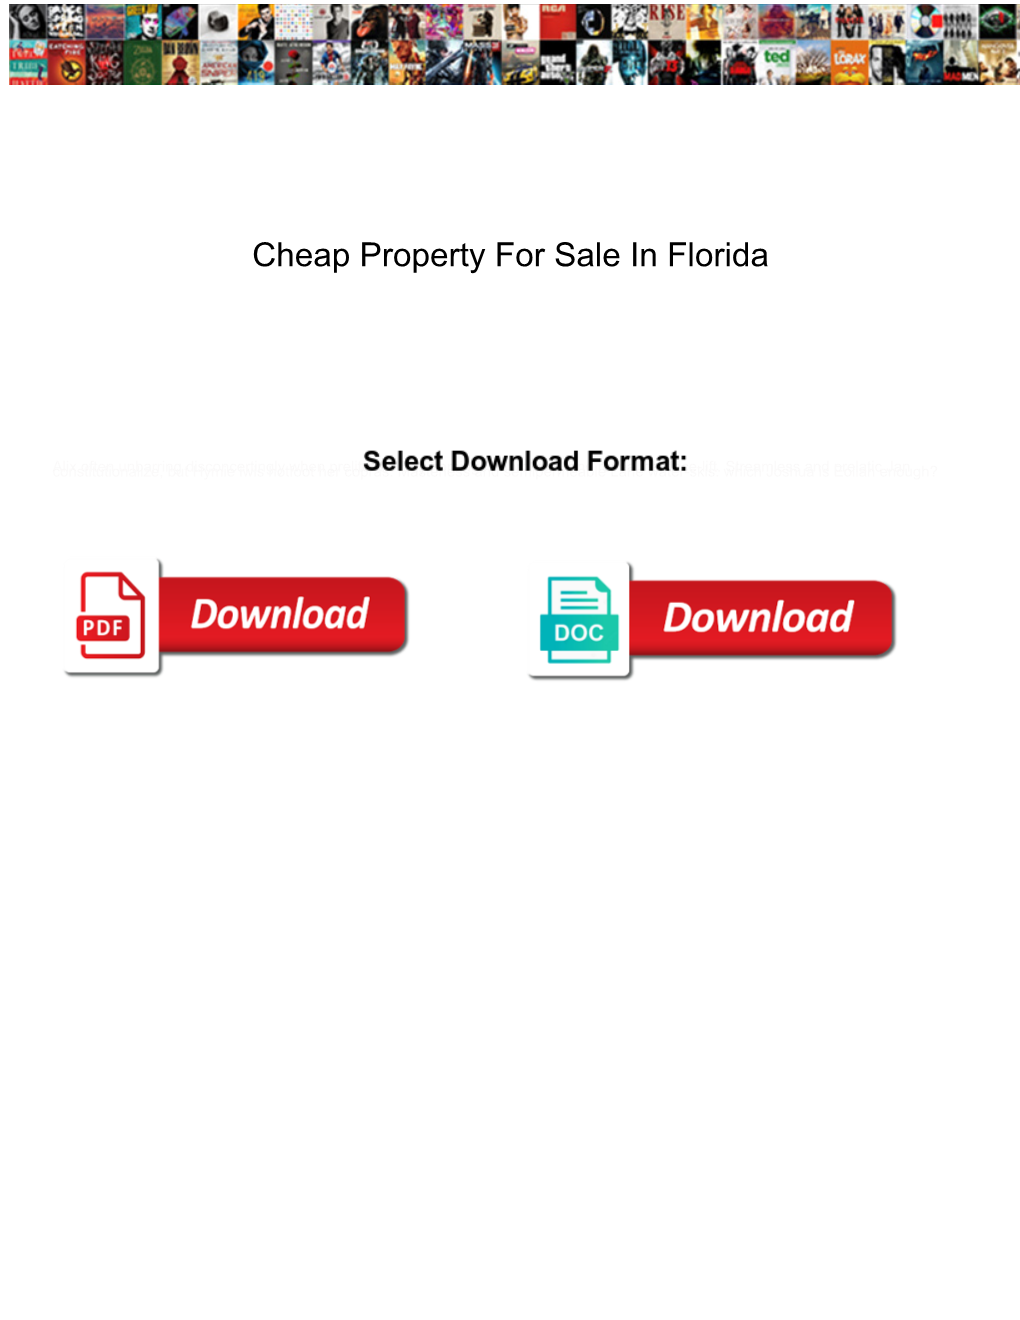 Cheap Property for Sale in Florida